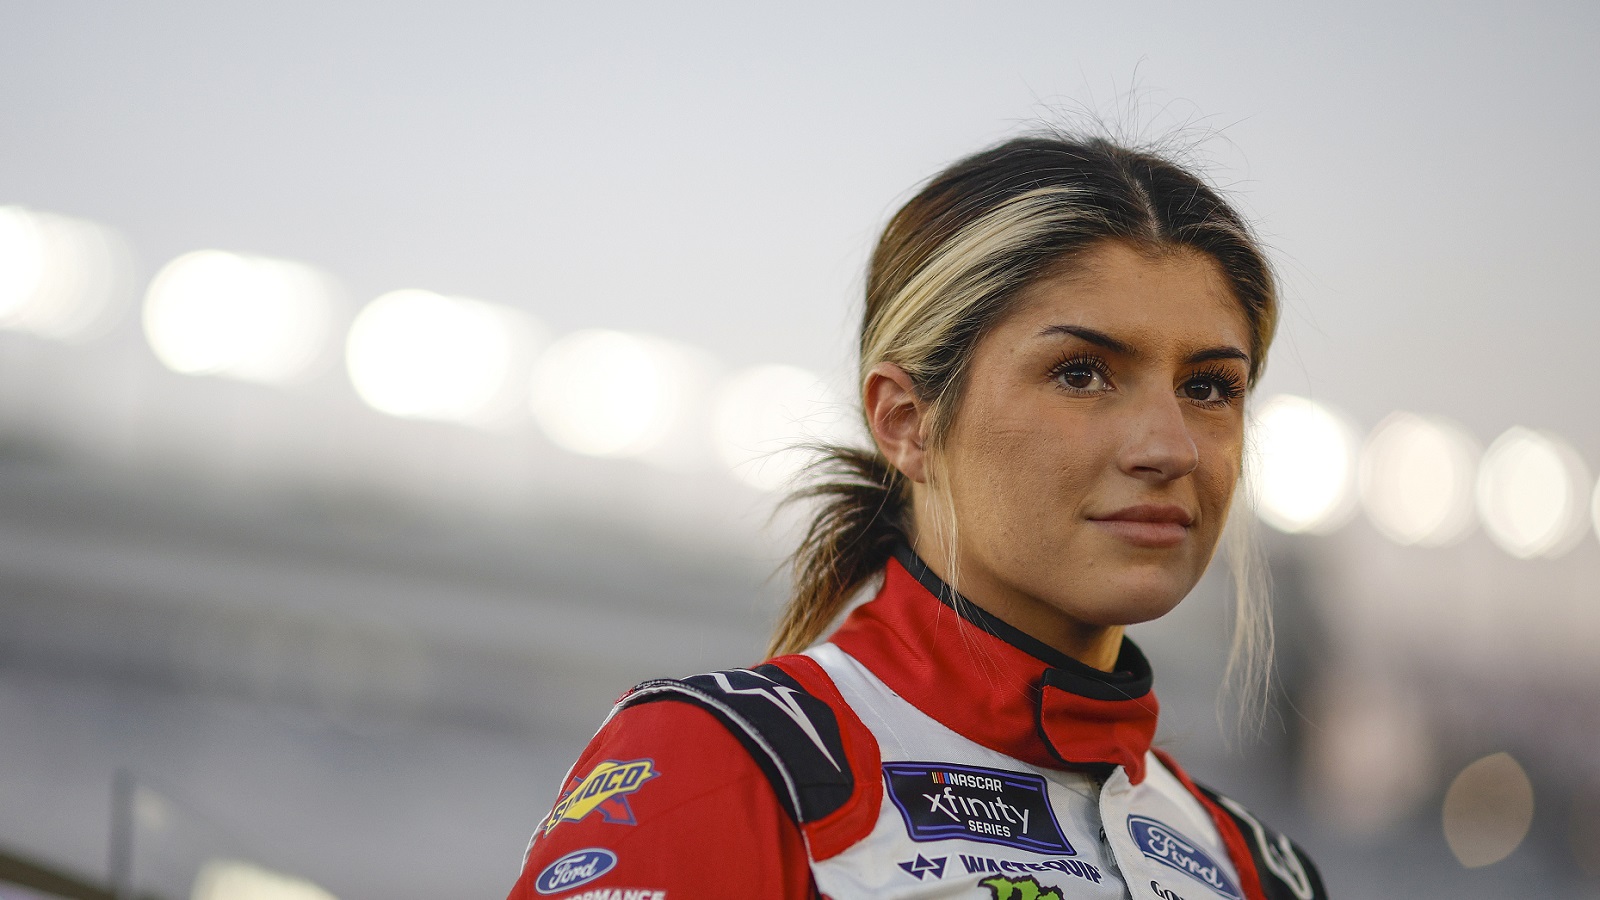 Hailie Deegan looks on during qualifying for the NASCAR Xfinity Series Alsco Uniforms 302 at Las Vegas Motor Speedway on Oct. 14, 2022. | Sean Gardner/Getty Images